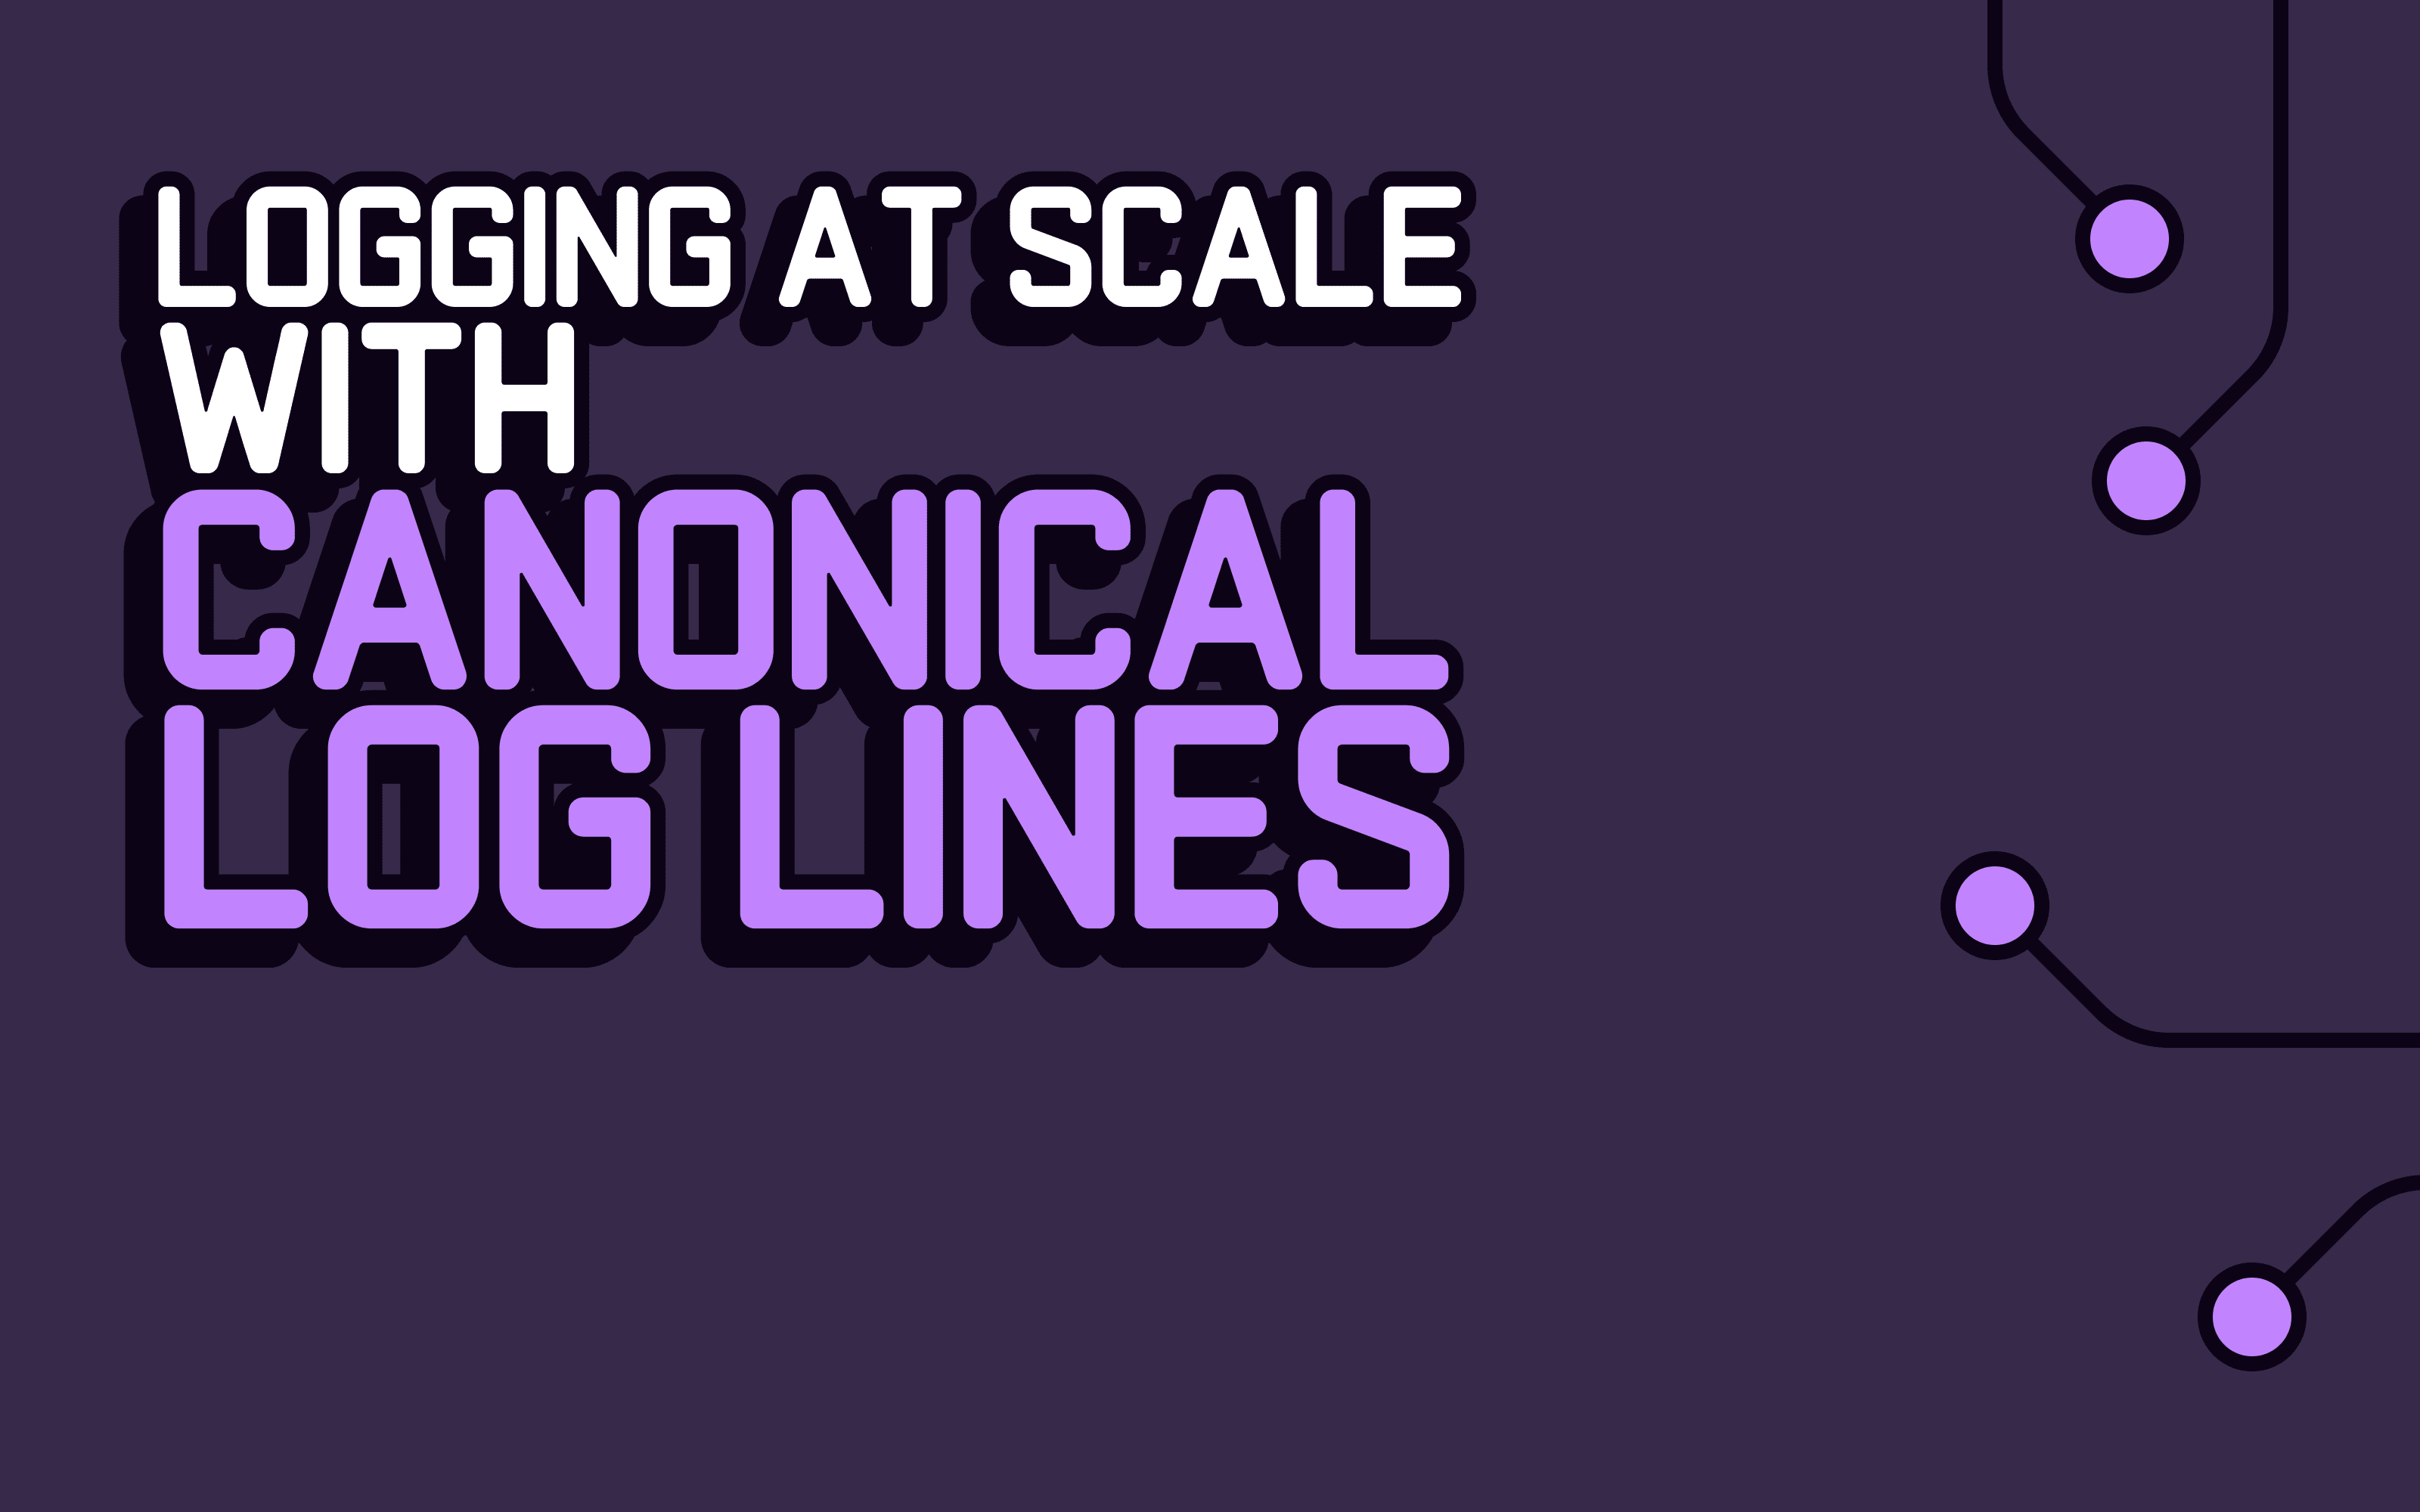 Logging at scale with canonical log lines